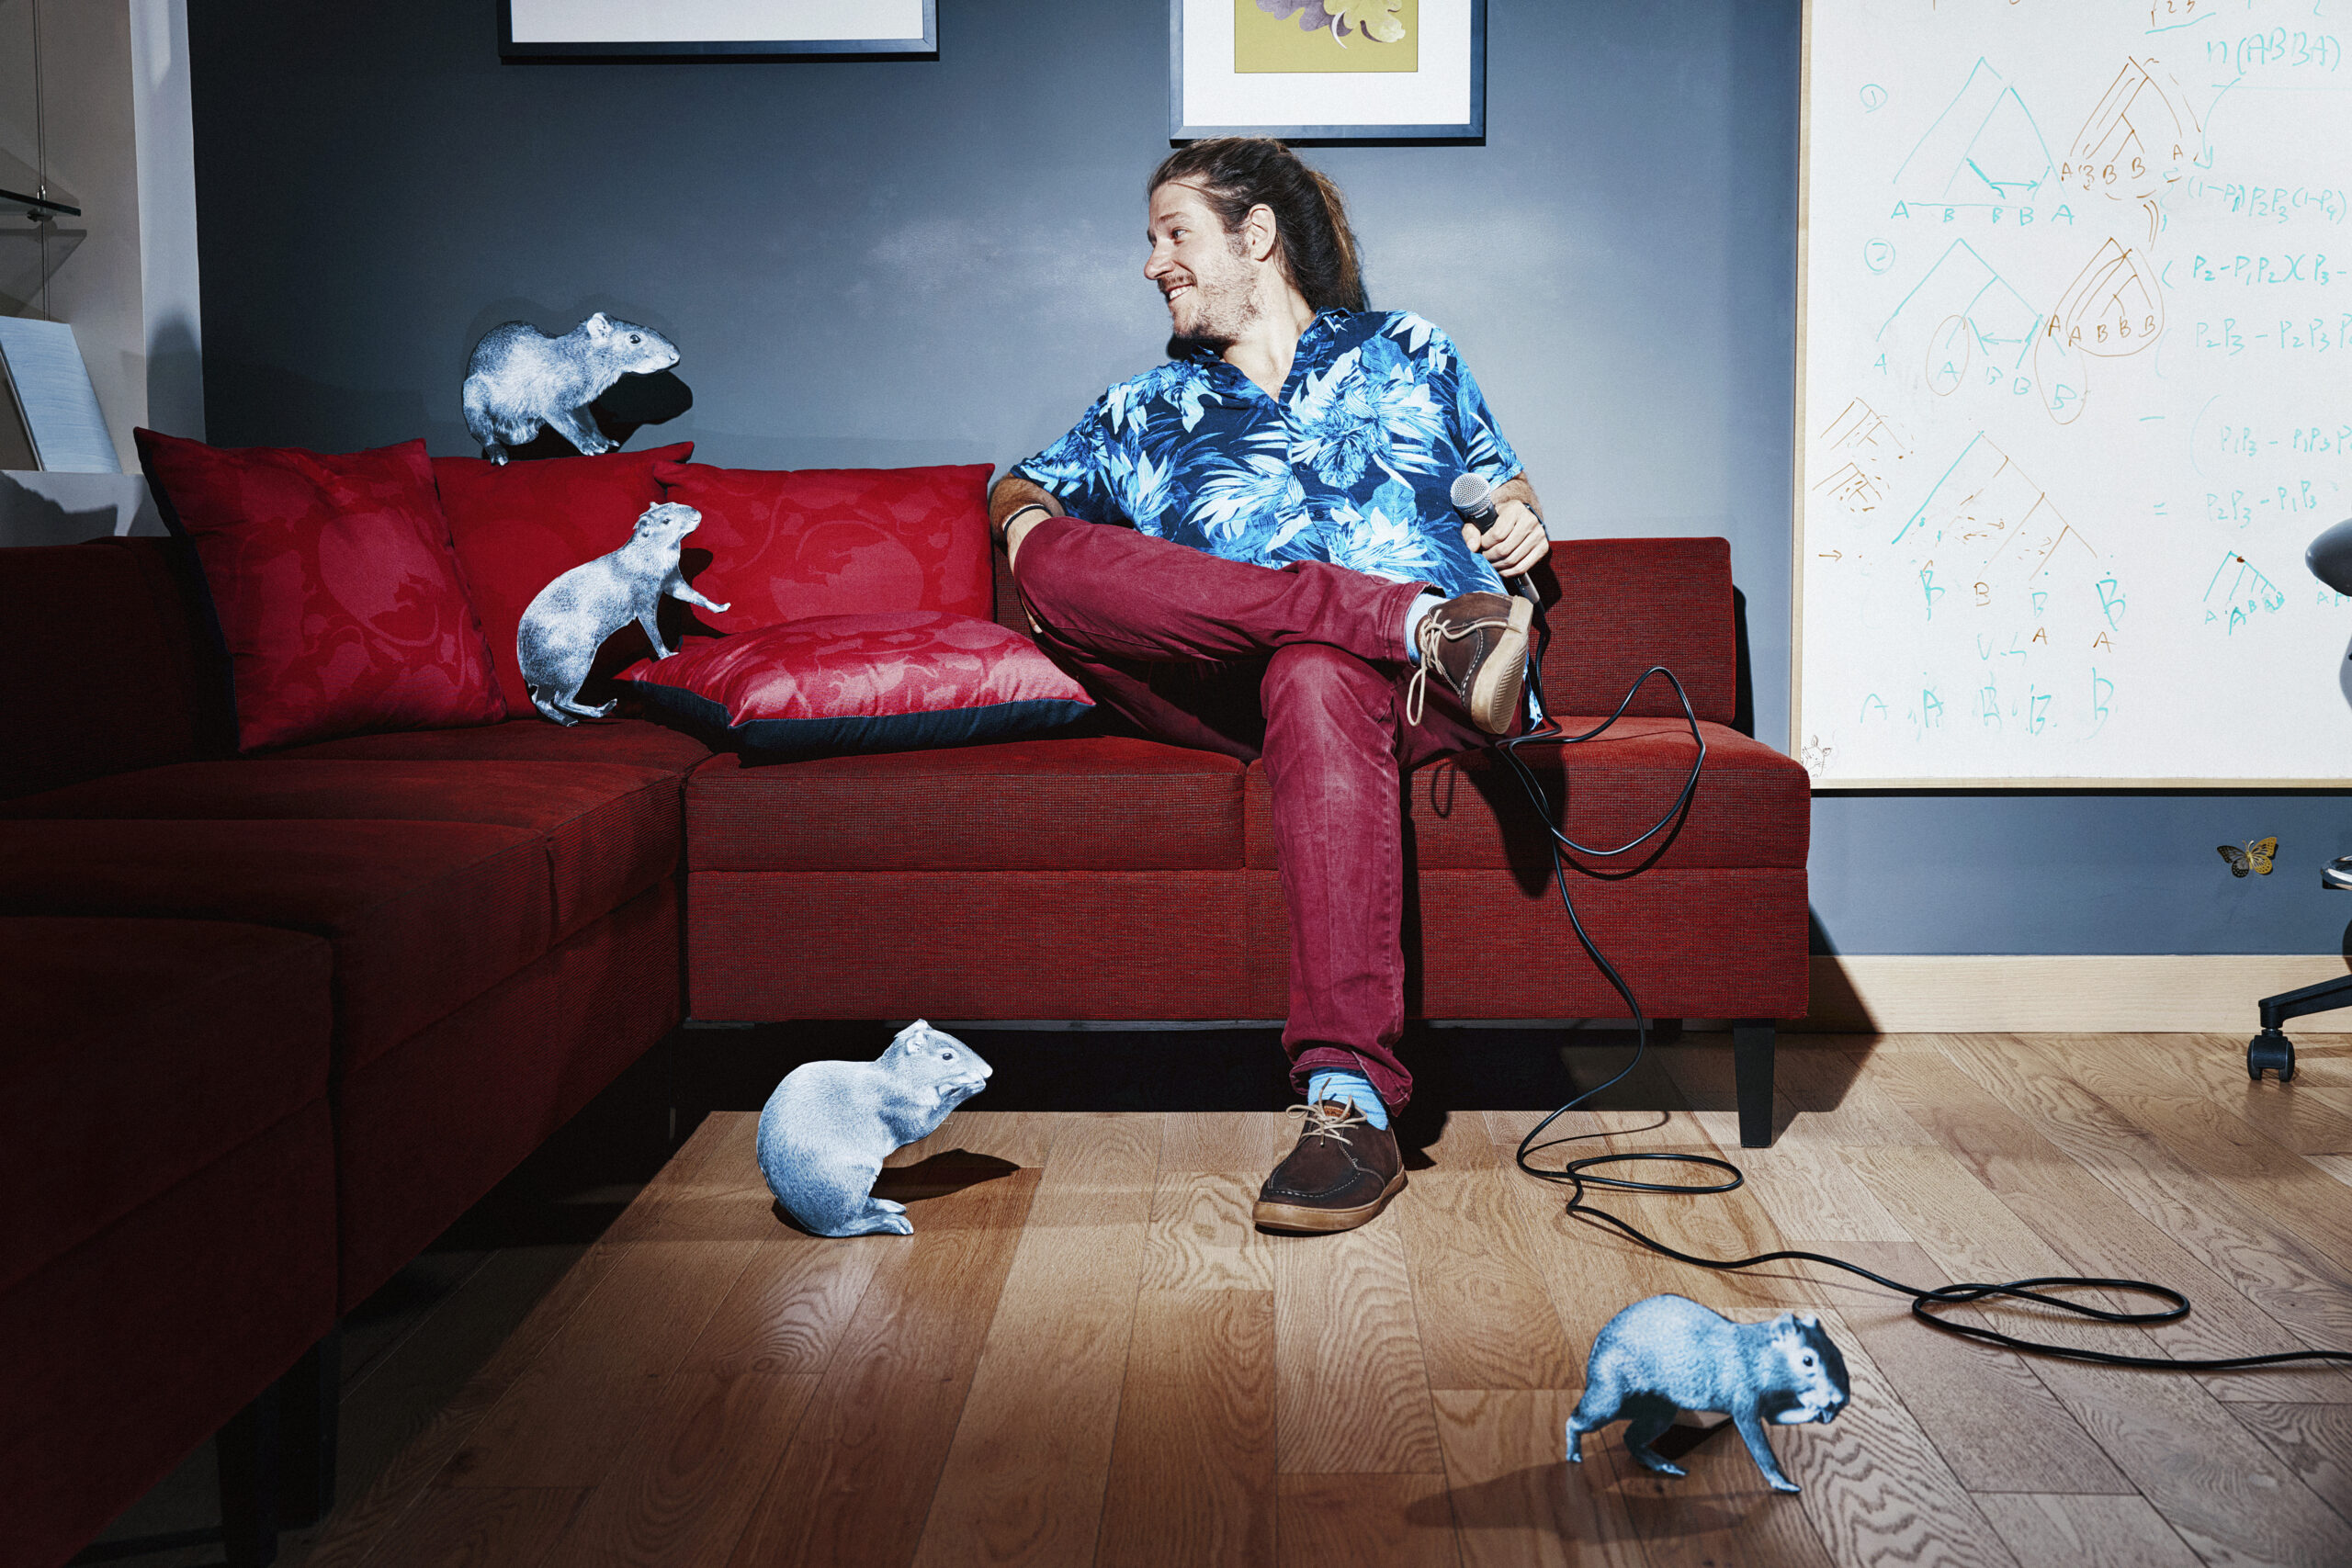 Neuroscientist Nacho Sanguinetti with a microphone on a red couch looking at black and white photo cutouts of realistic agoutis set up like an audience.